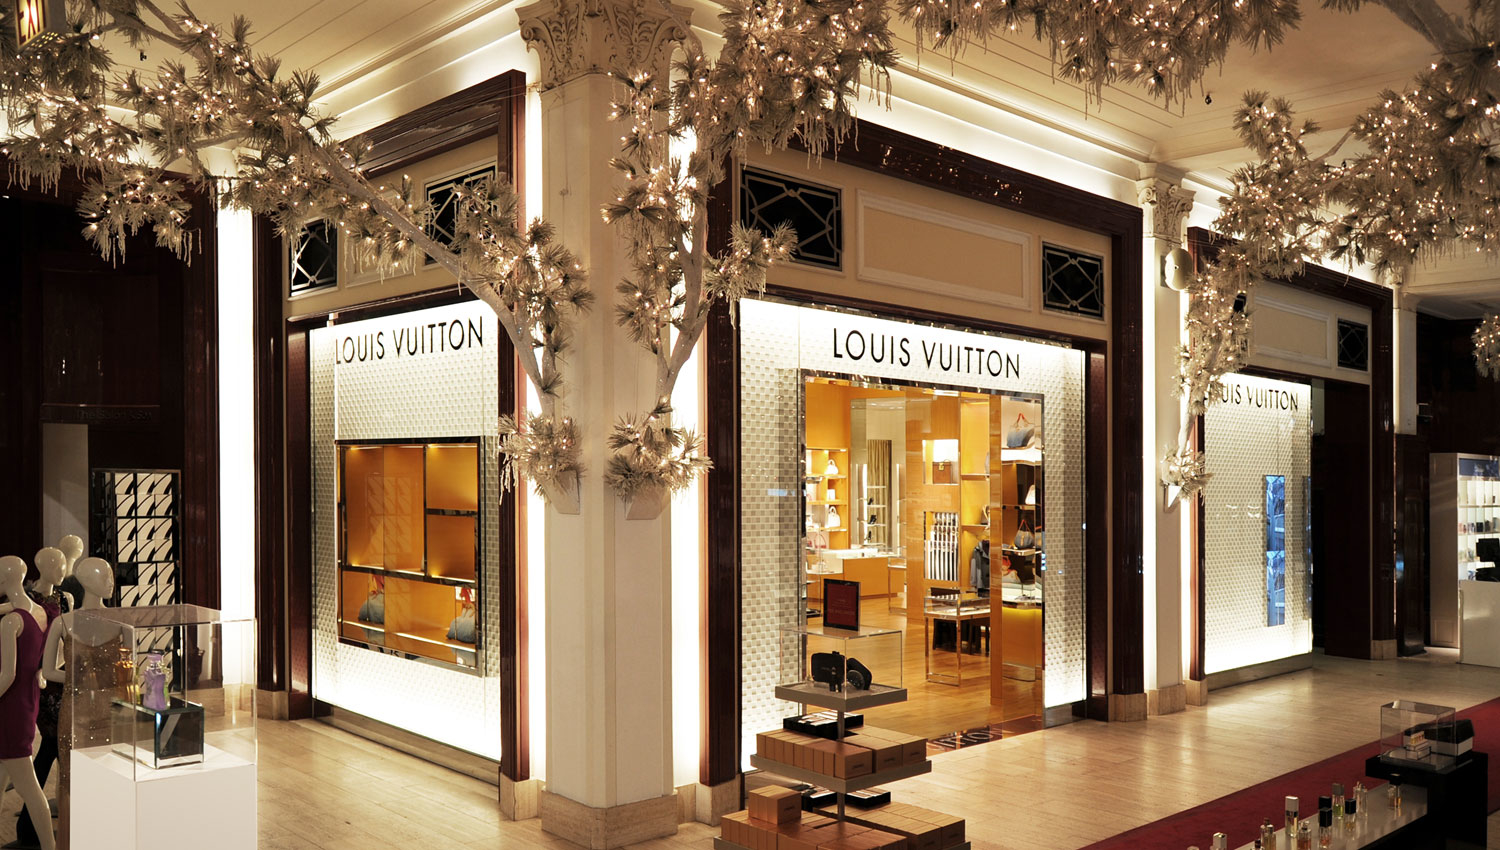 Louis Vuitton New York Saks Fifth Ave, New York New York (NY) - www.bagssaleusa.com/product-category/scarves/